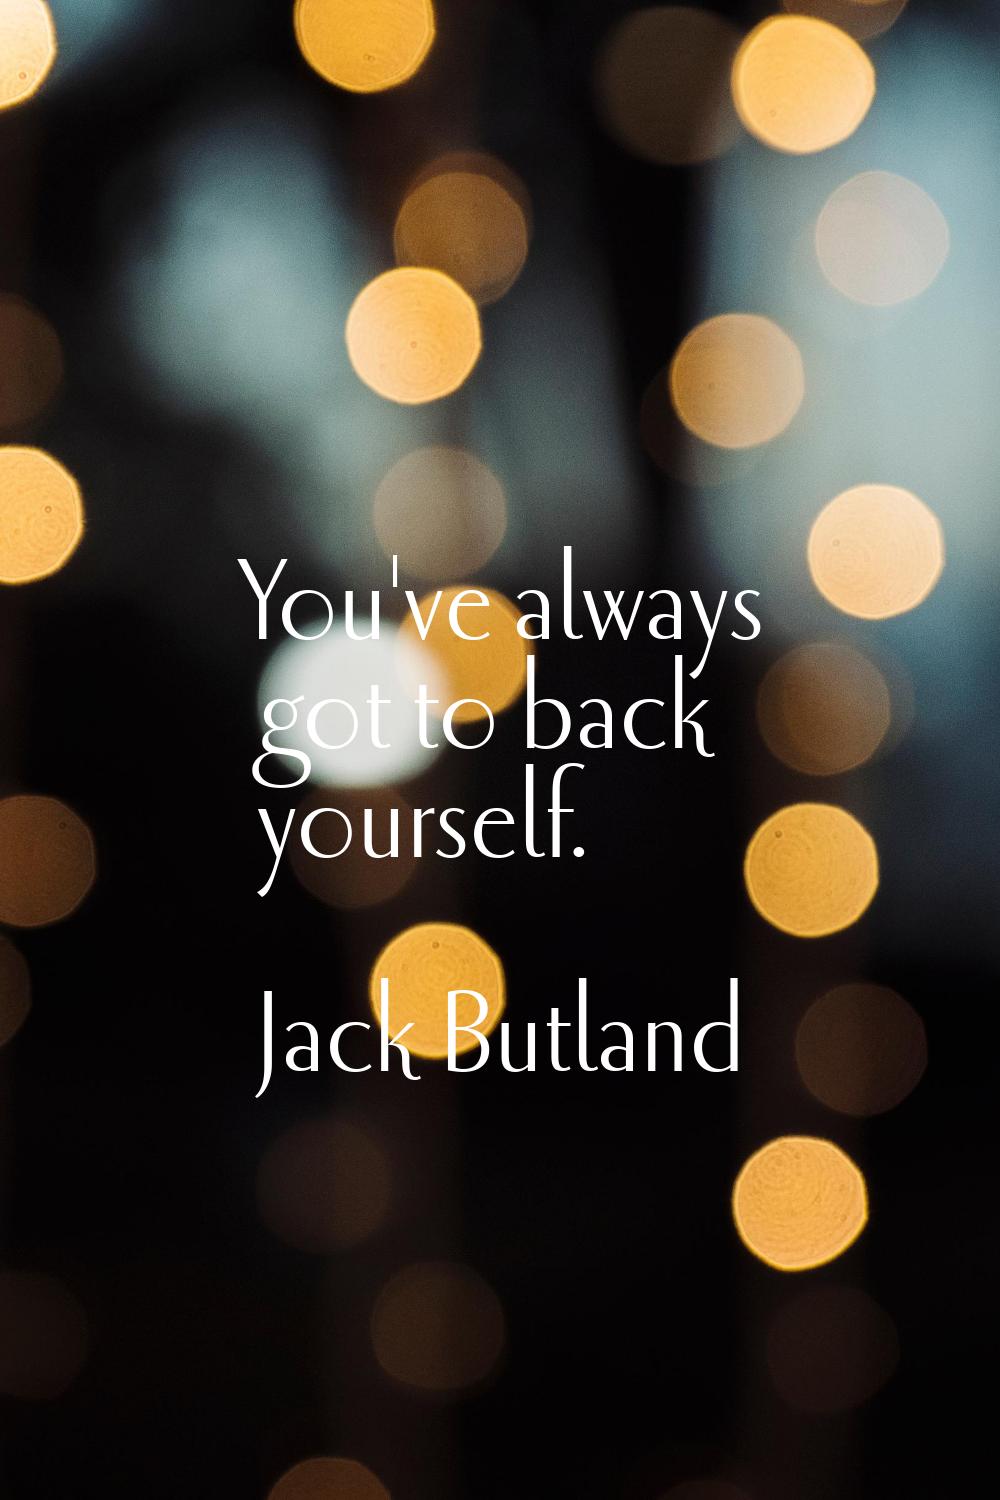 You've always got to back yourself.